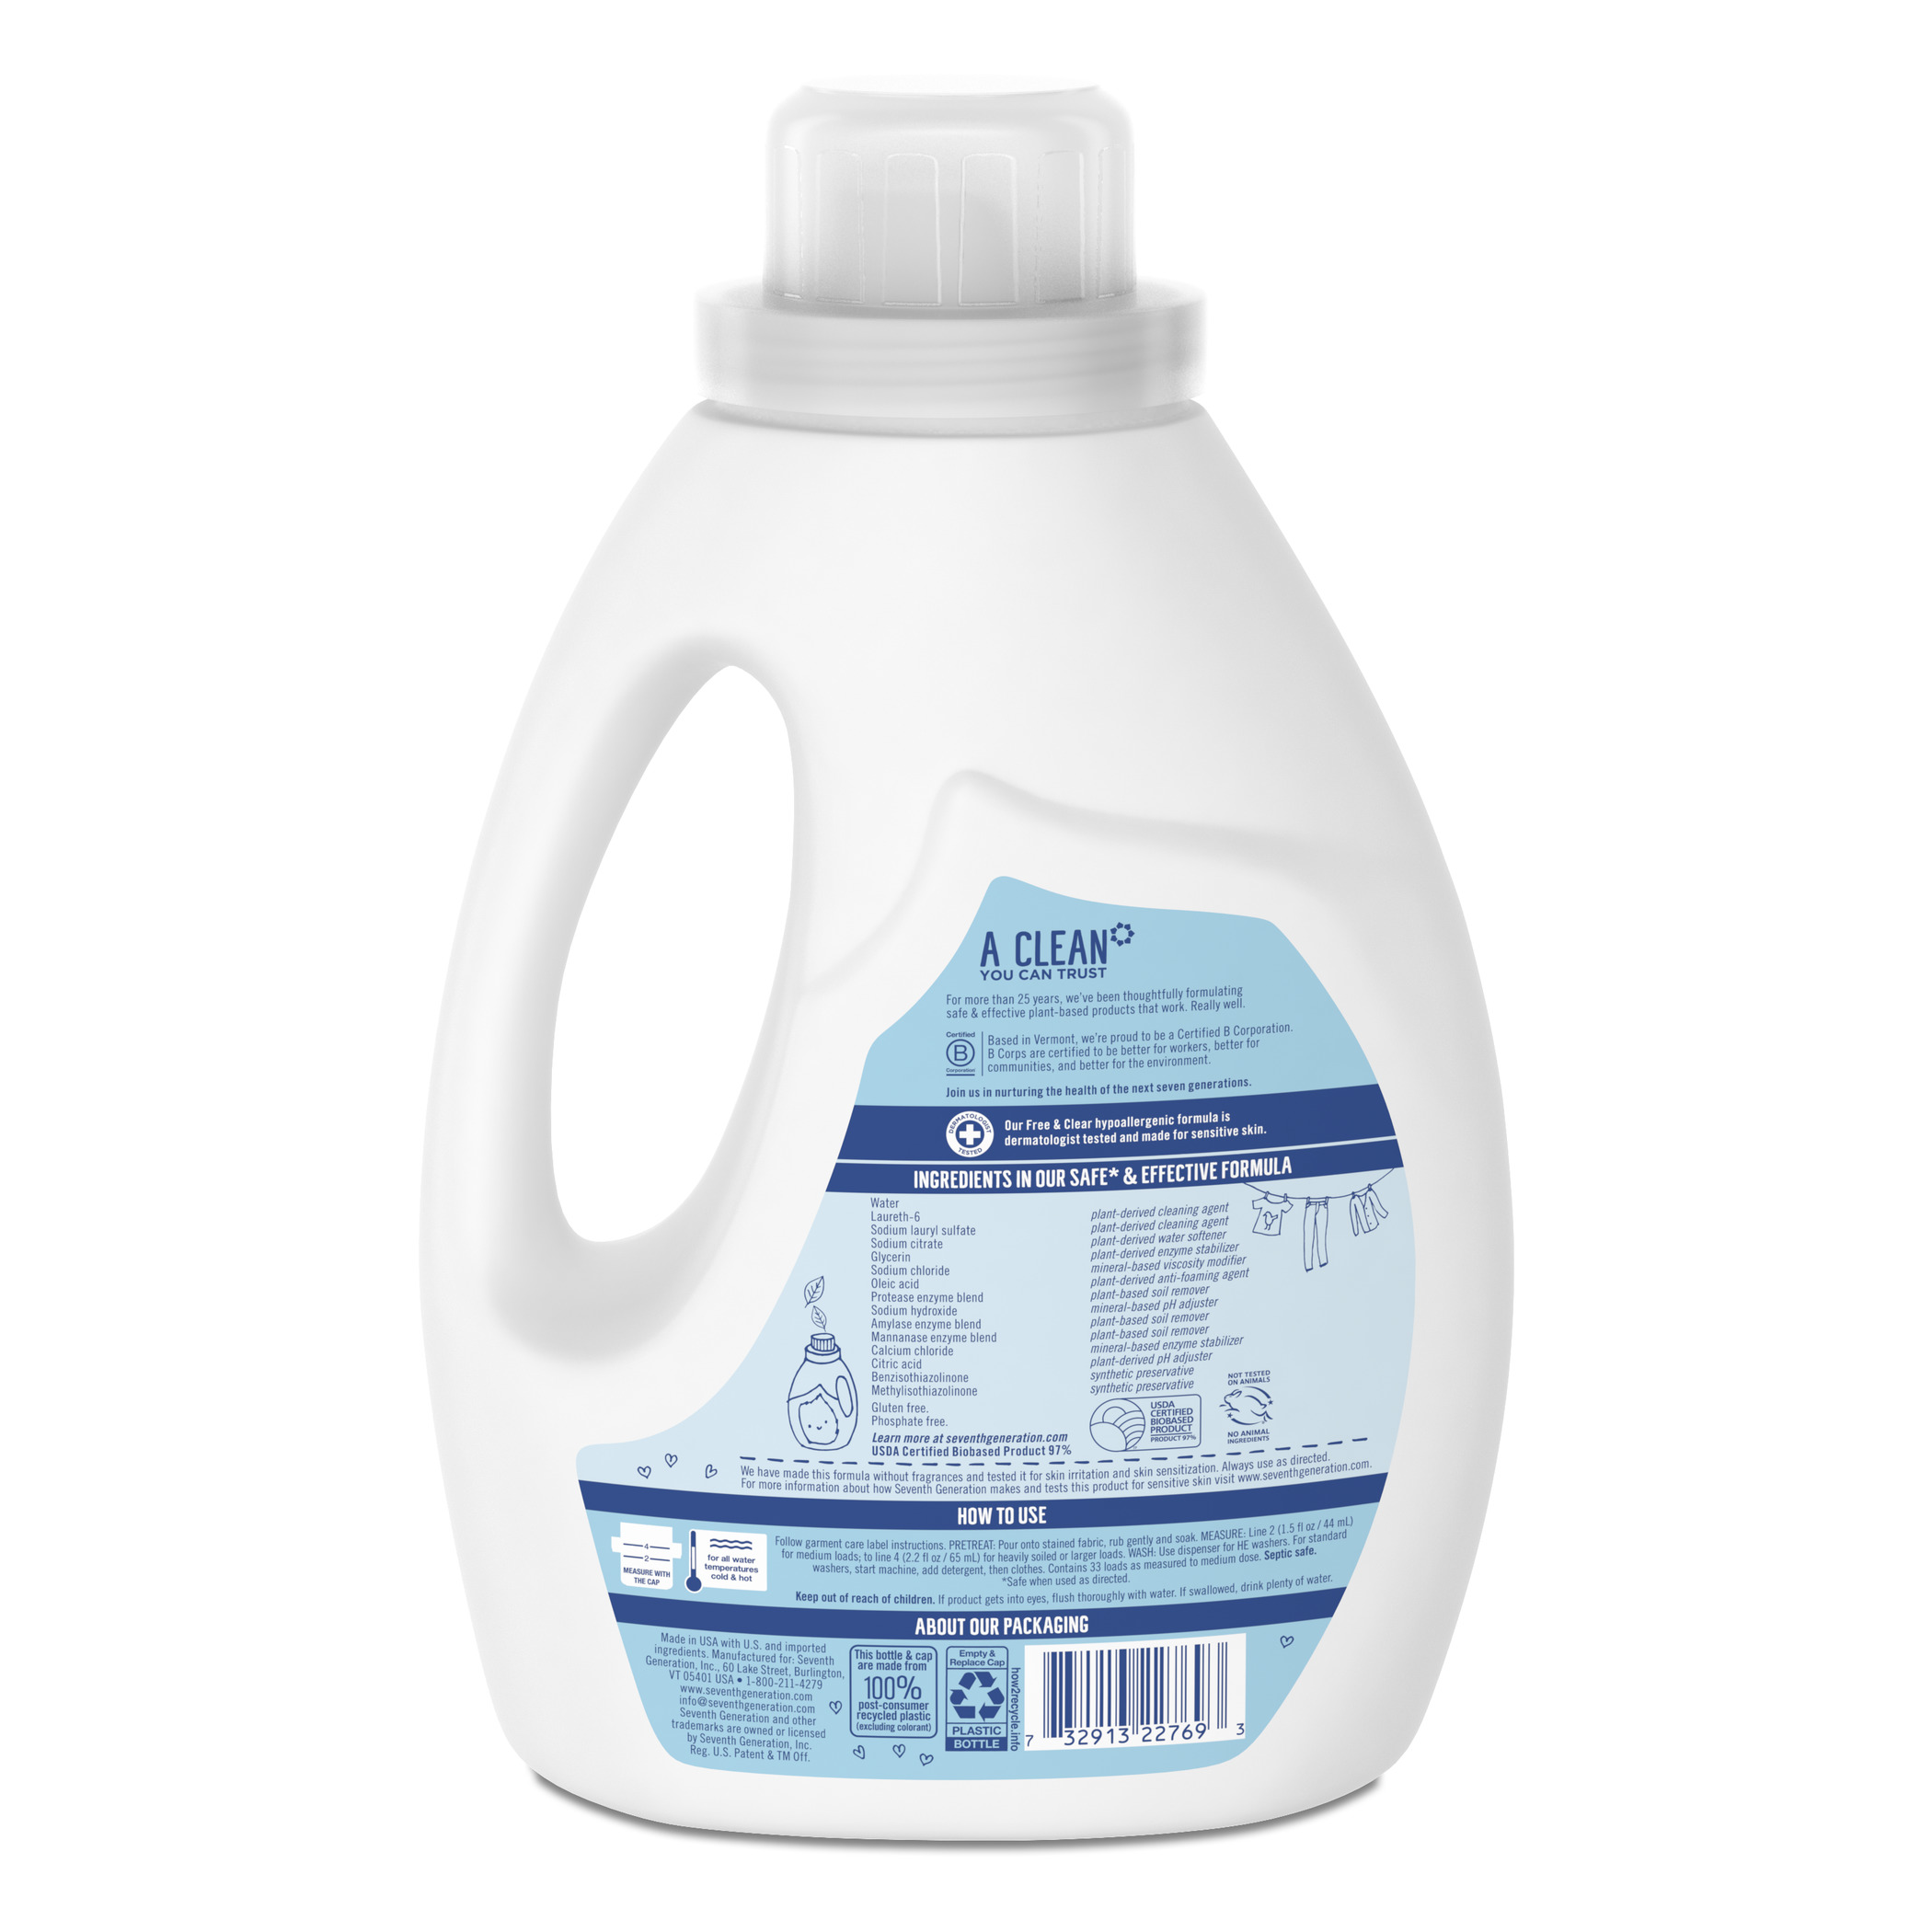 safe laundry detergent that works